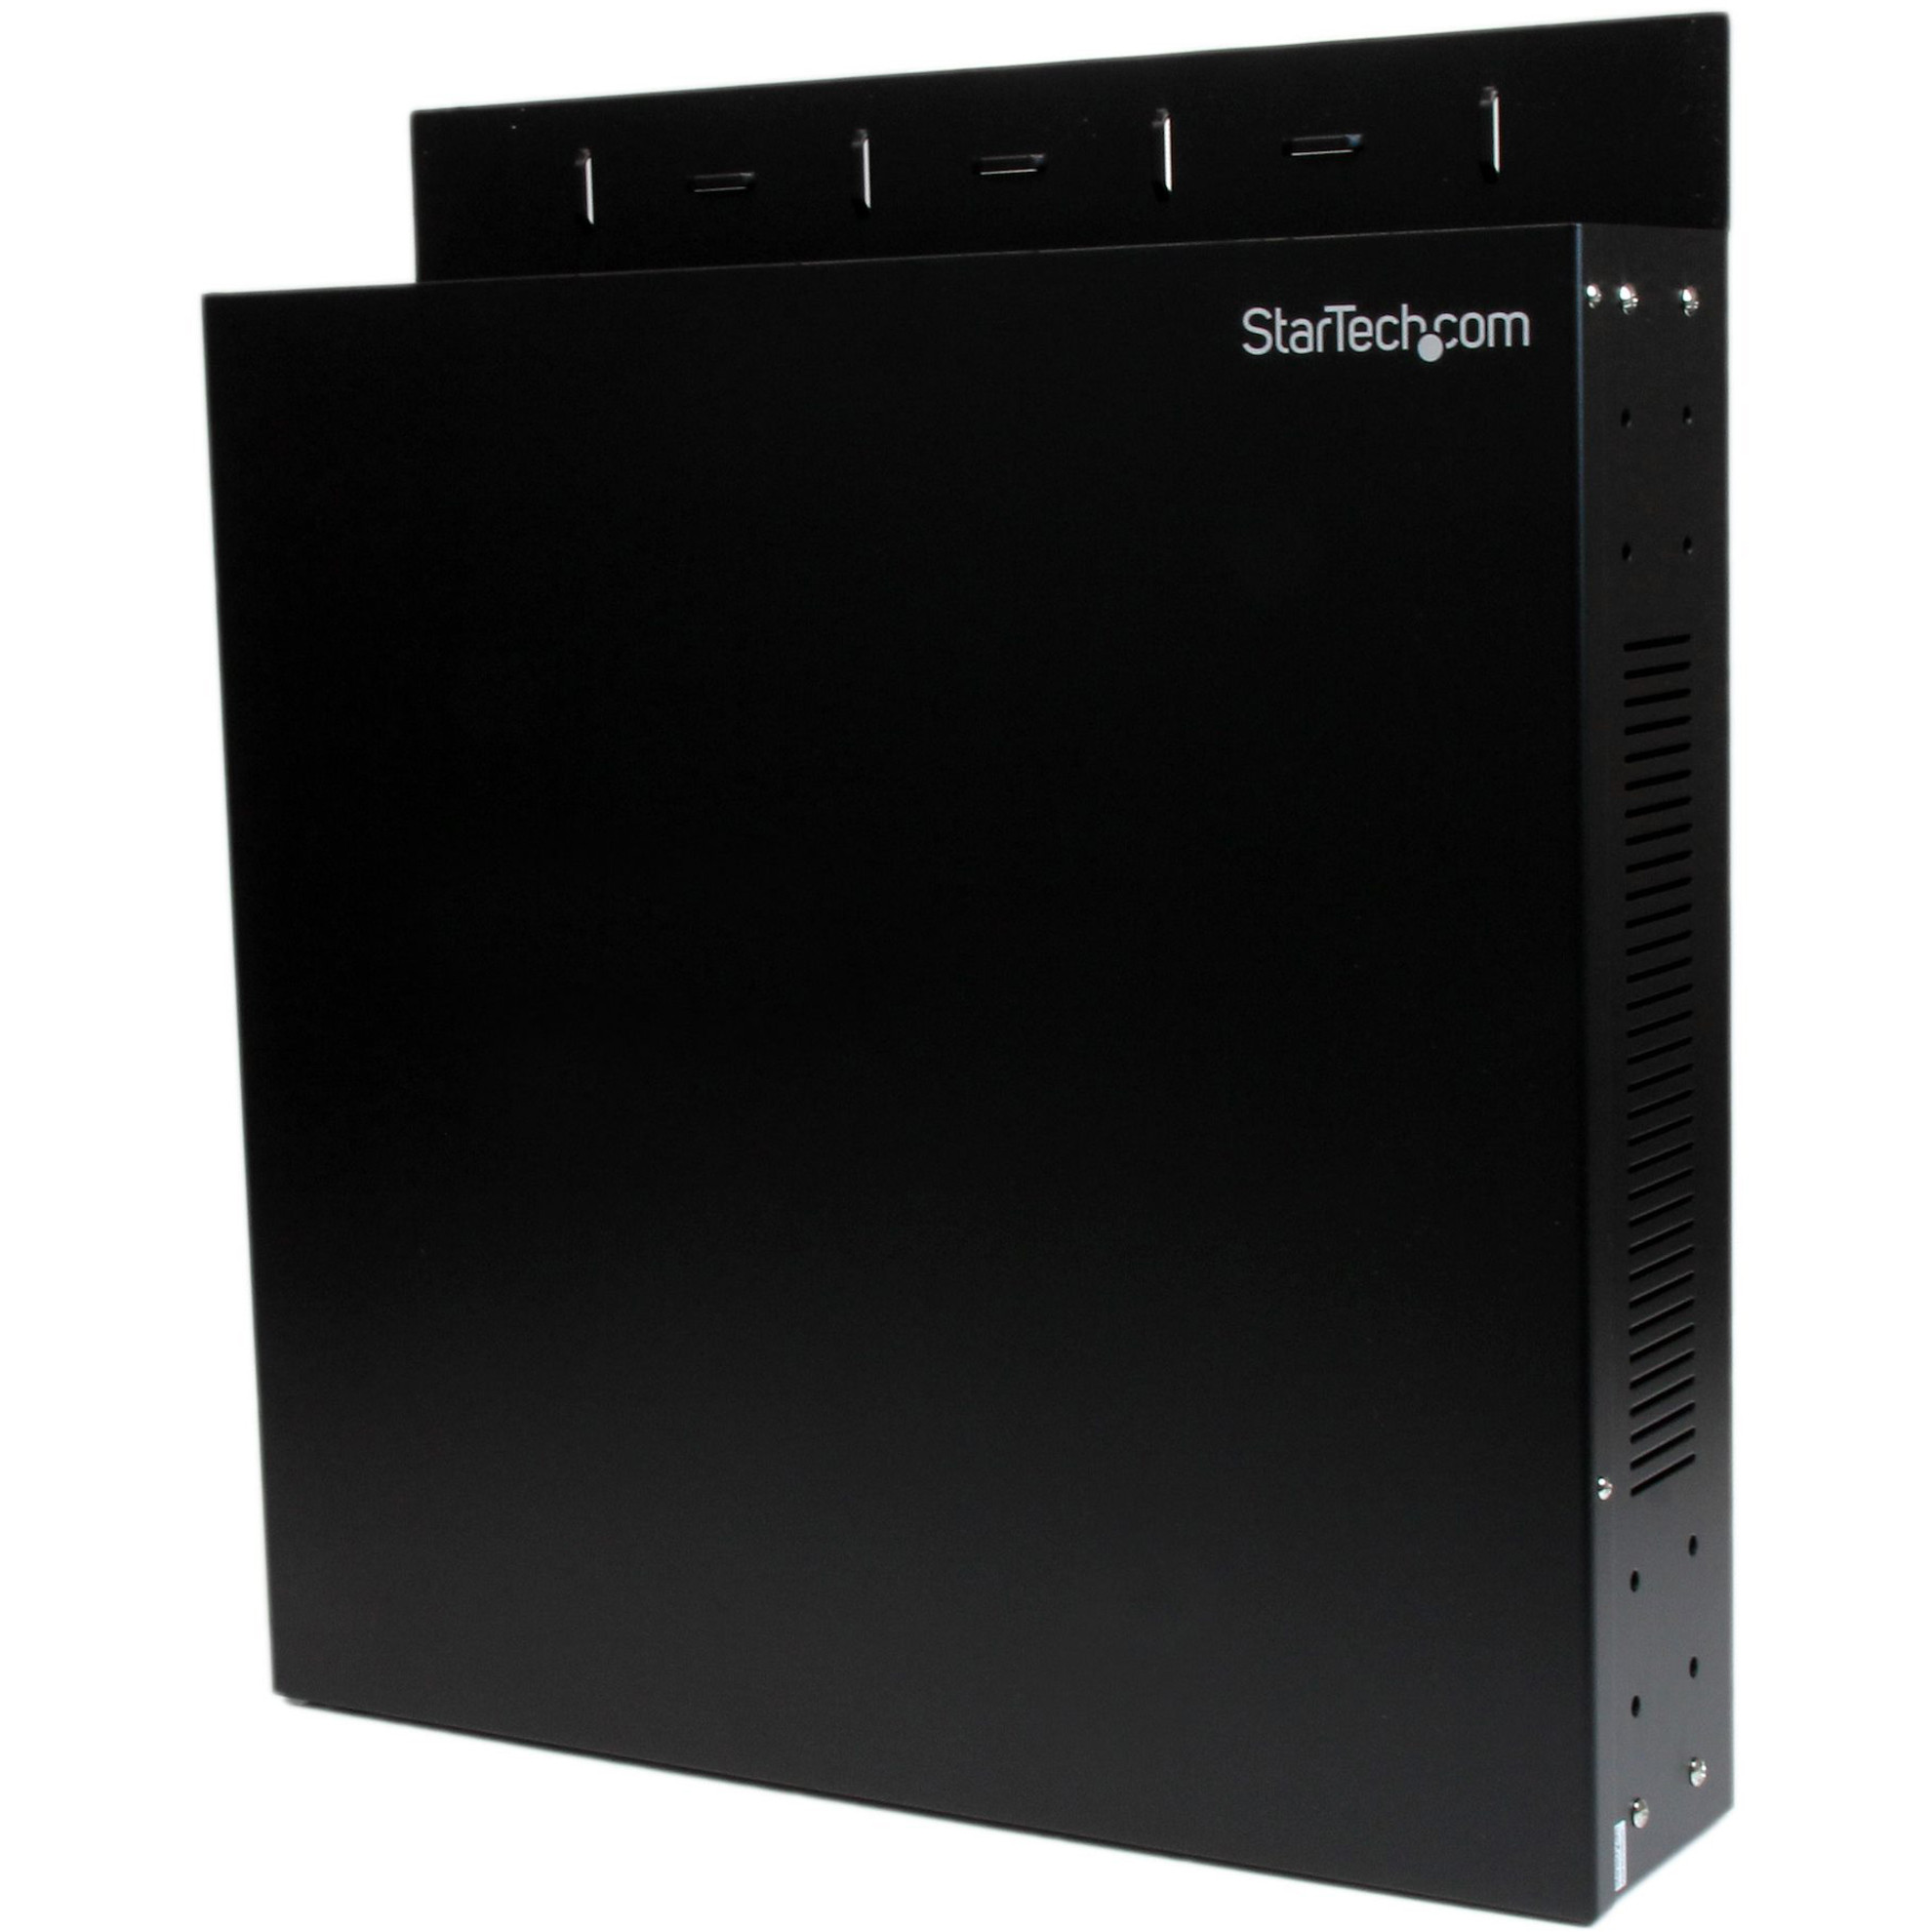 Startech .com Wallmount Server RackVertical Mounting Rack for Server2UVertically mount your server or networking equipment to a wall,… RK219WALVO